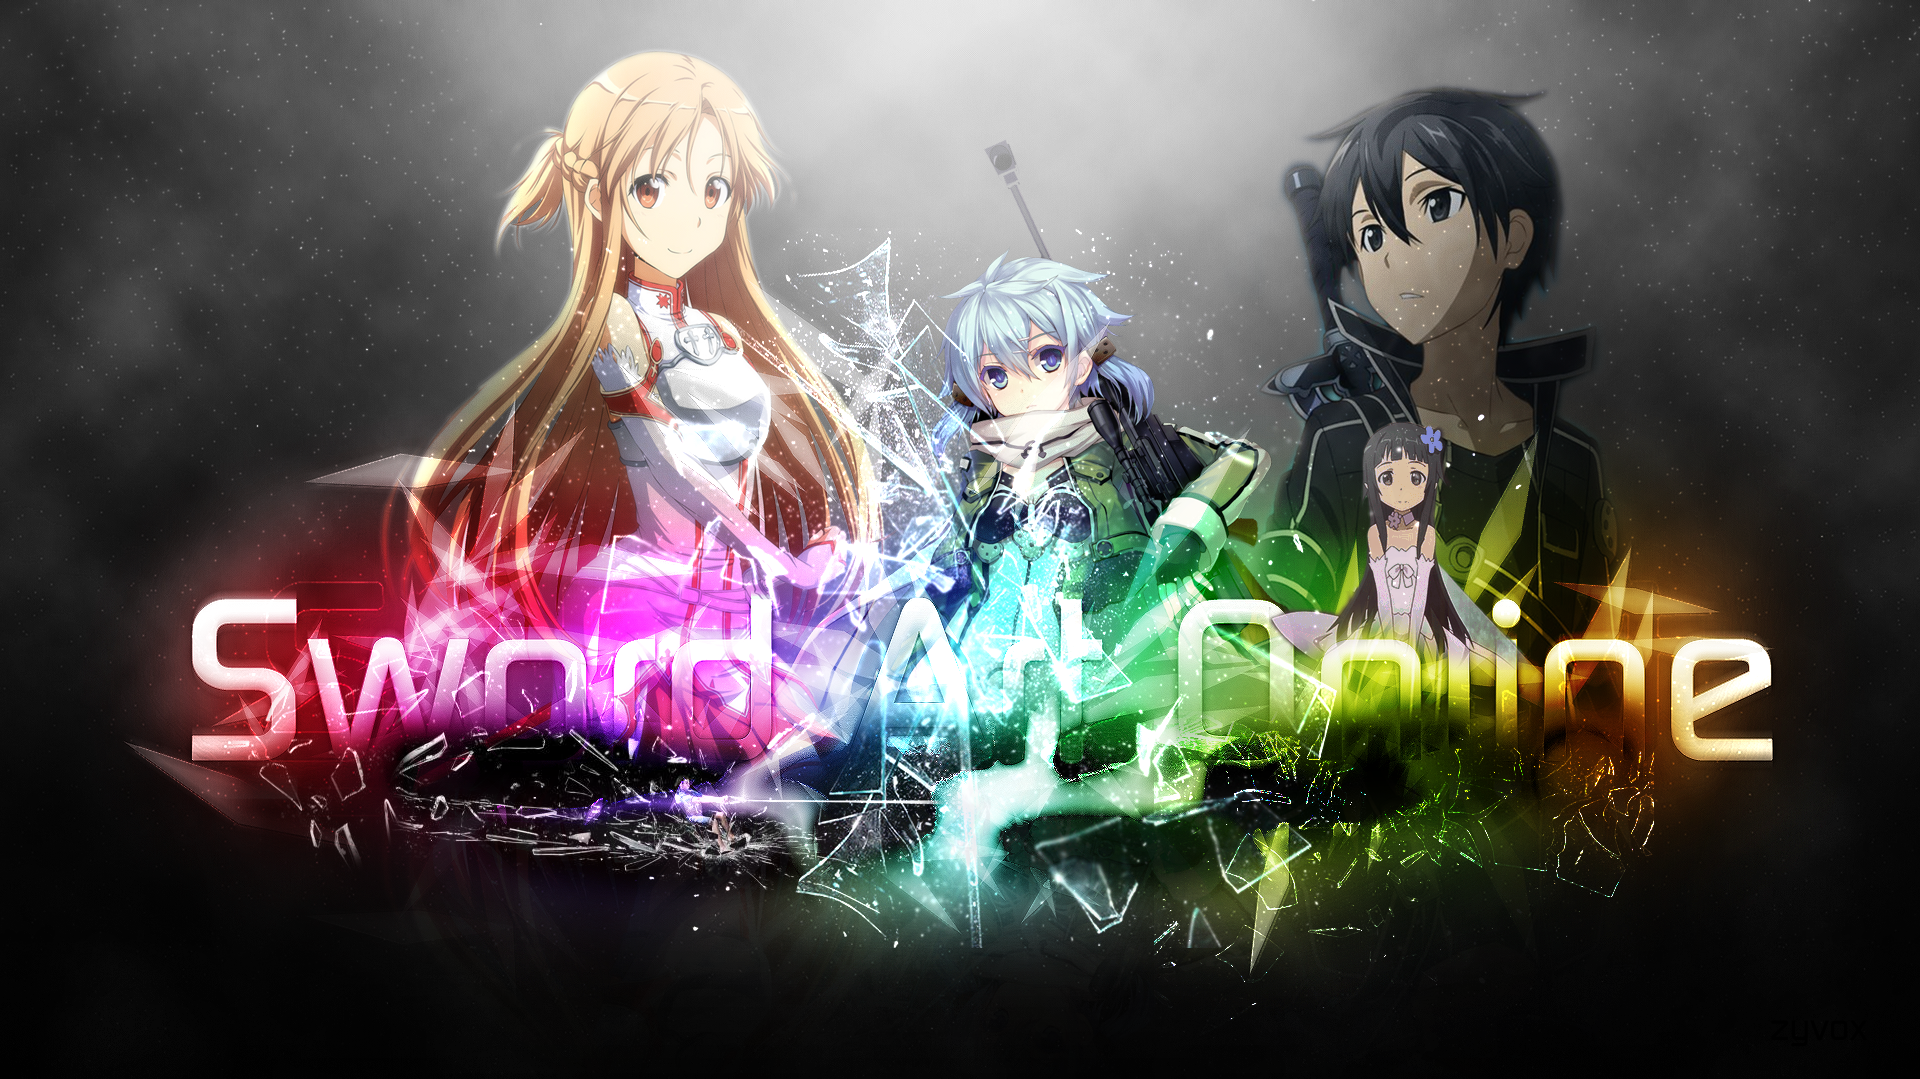  Sword Art Online HD Wallpapers and Backgrounds